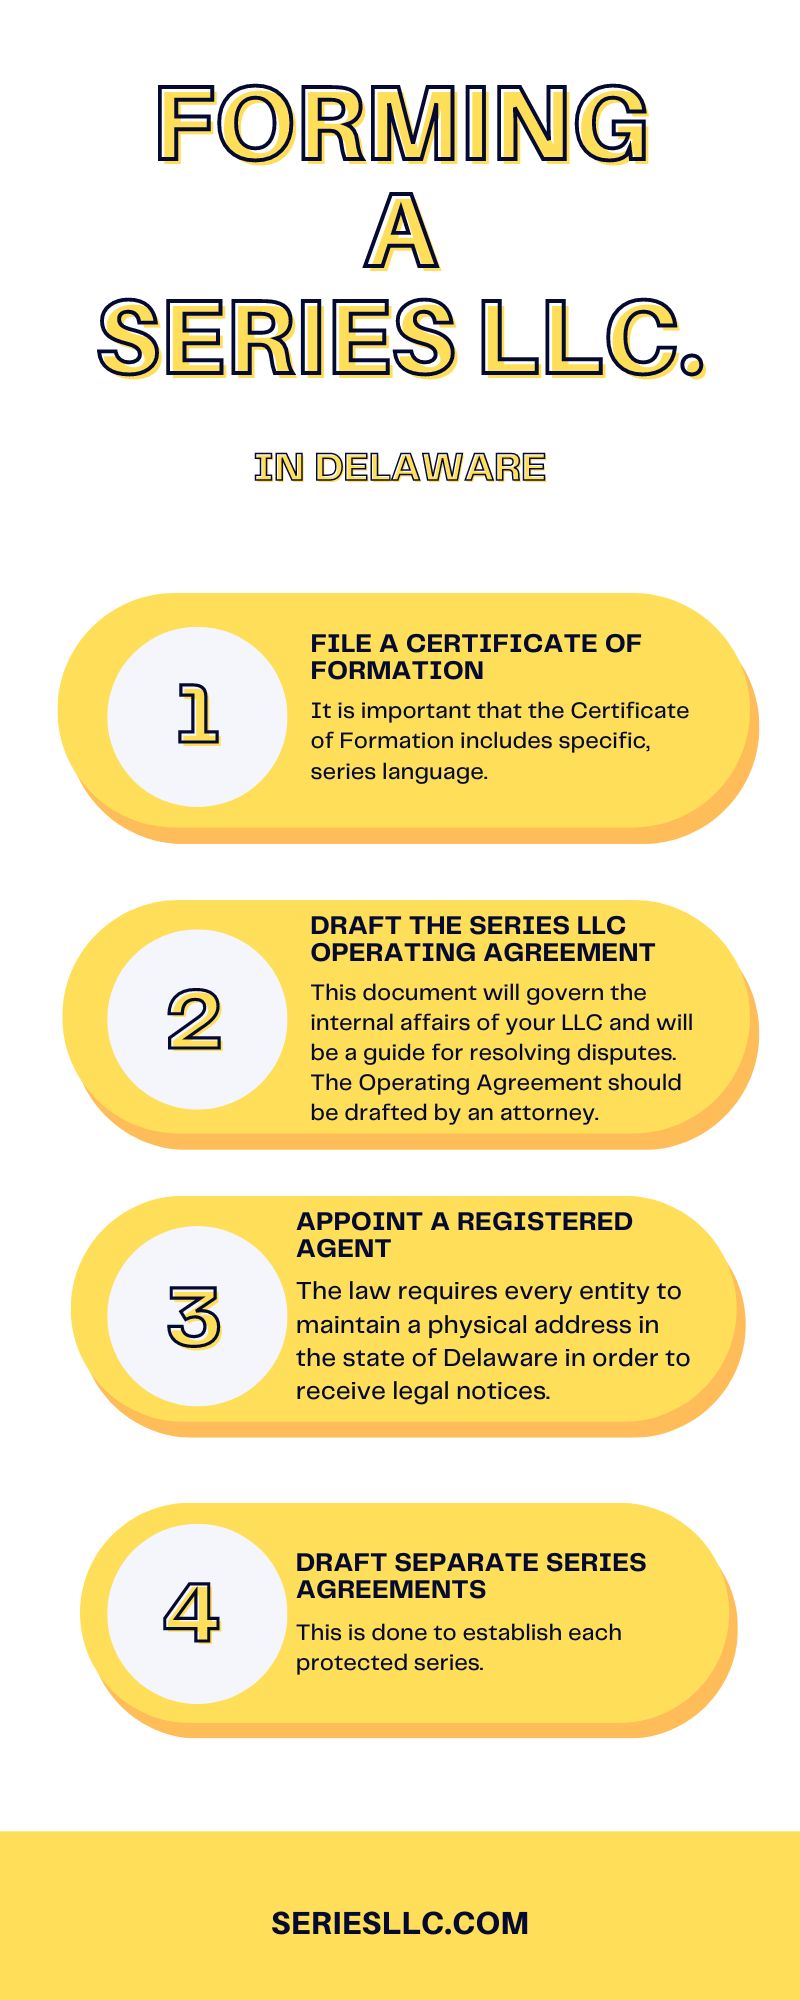 steps to form a series llc in delaware: file certificate of formation, draft the series llc operating agreement, appoint a registered agent, draft separate series agreeements